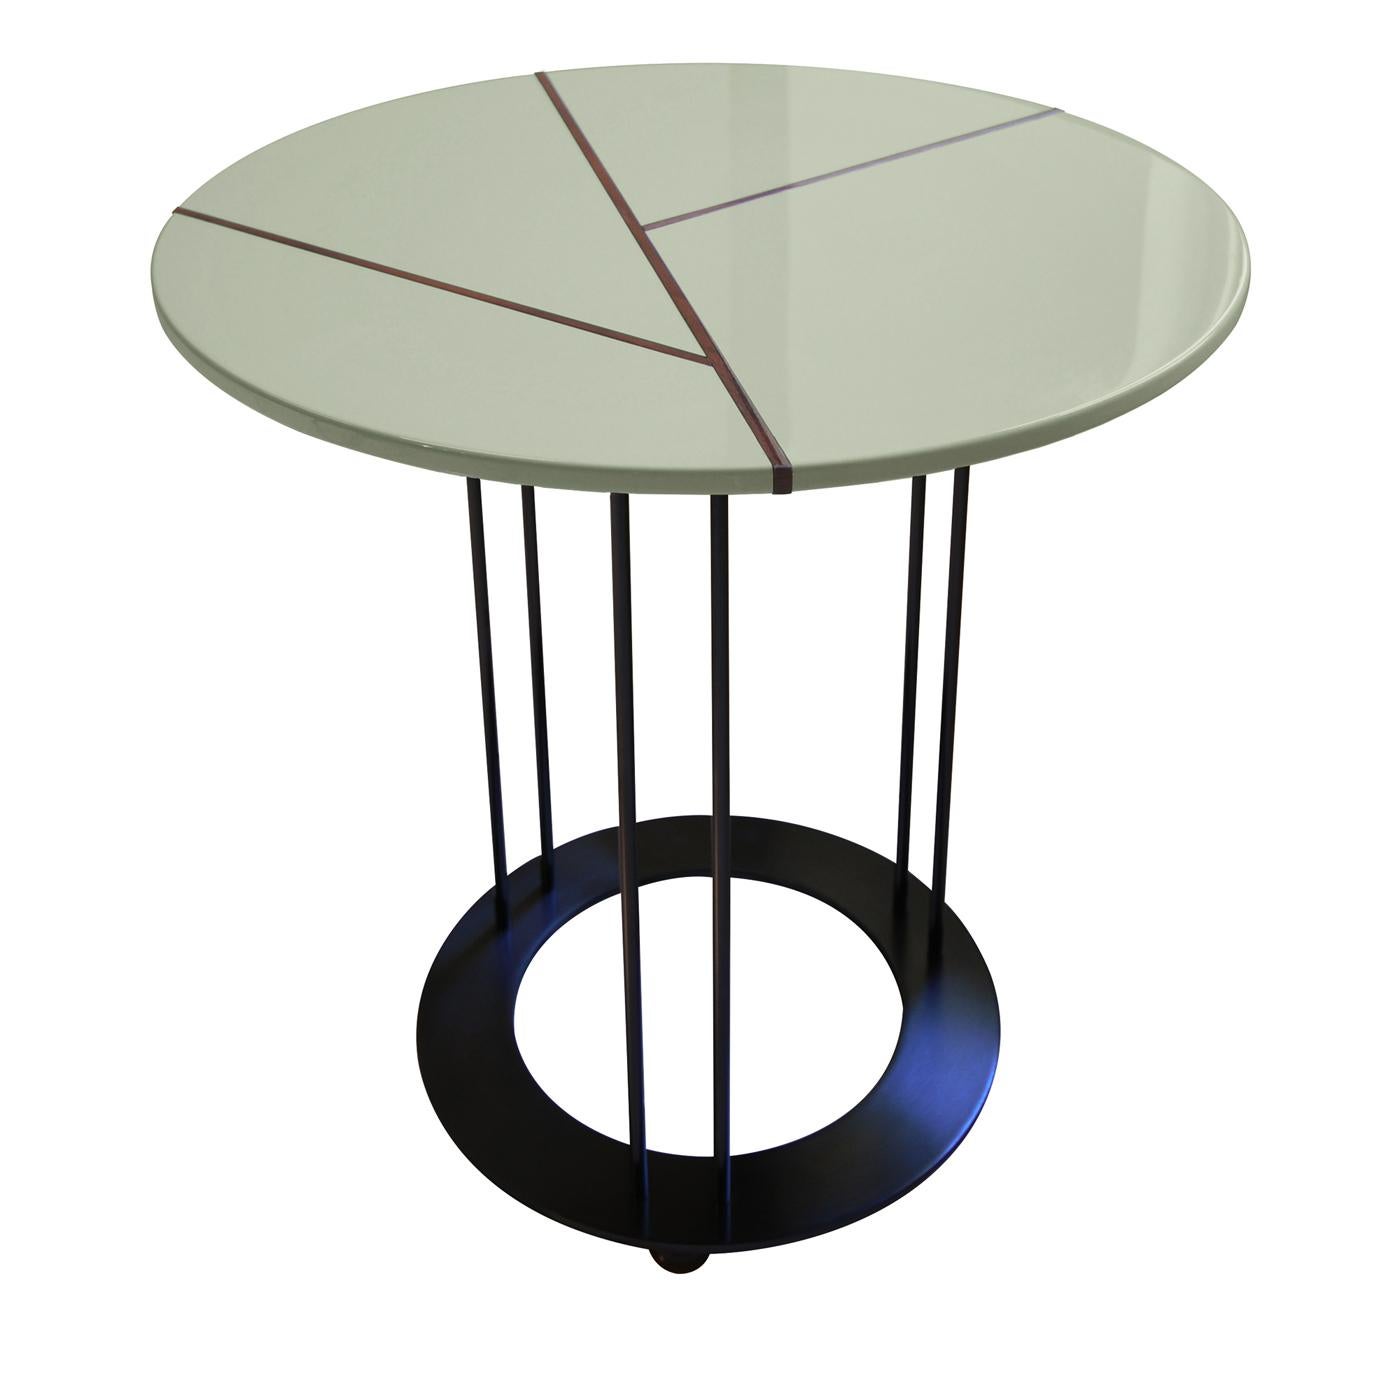 This coffee table has a sophisticated and contemporary allure marked by a unique interplay of leaf patterns. Its striking metal structure with a matte black finish comprises three pairs of slim stems functioning as legs, elegantly resting on a